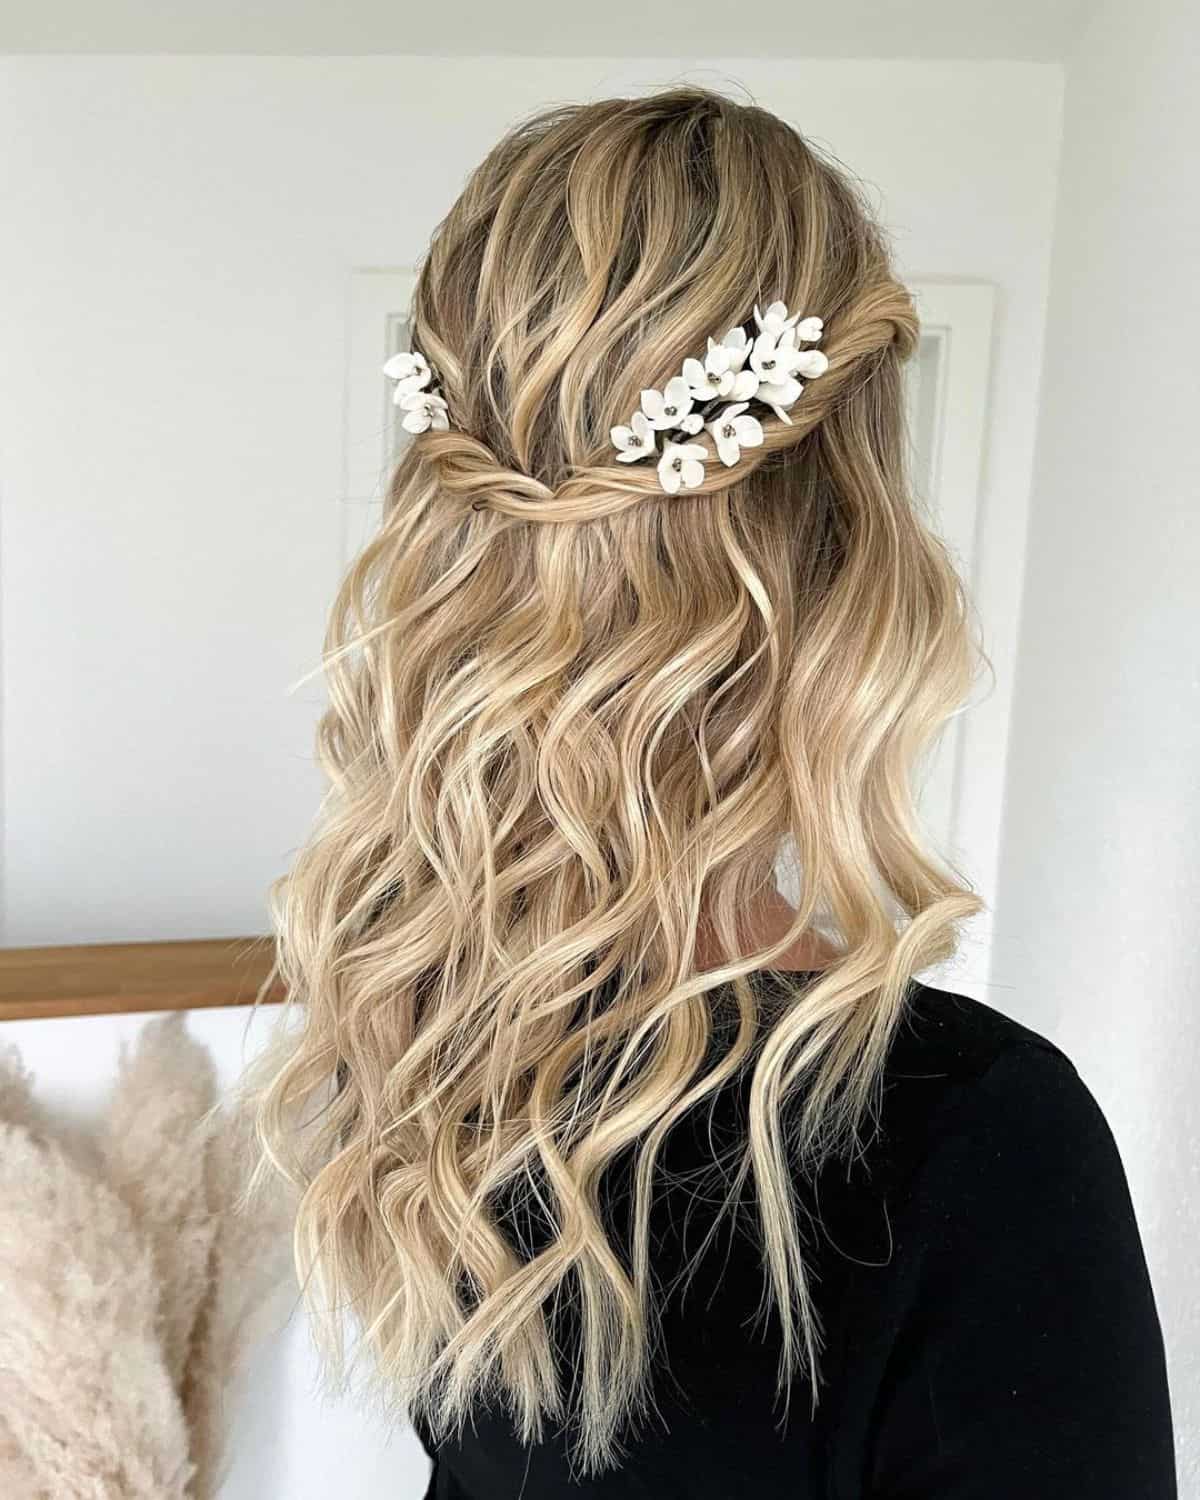 Half-Updo woman's hairstyle.